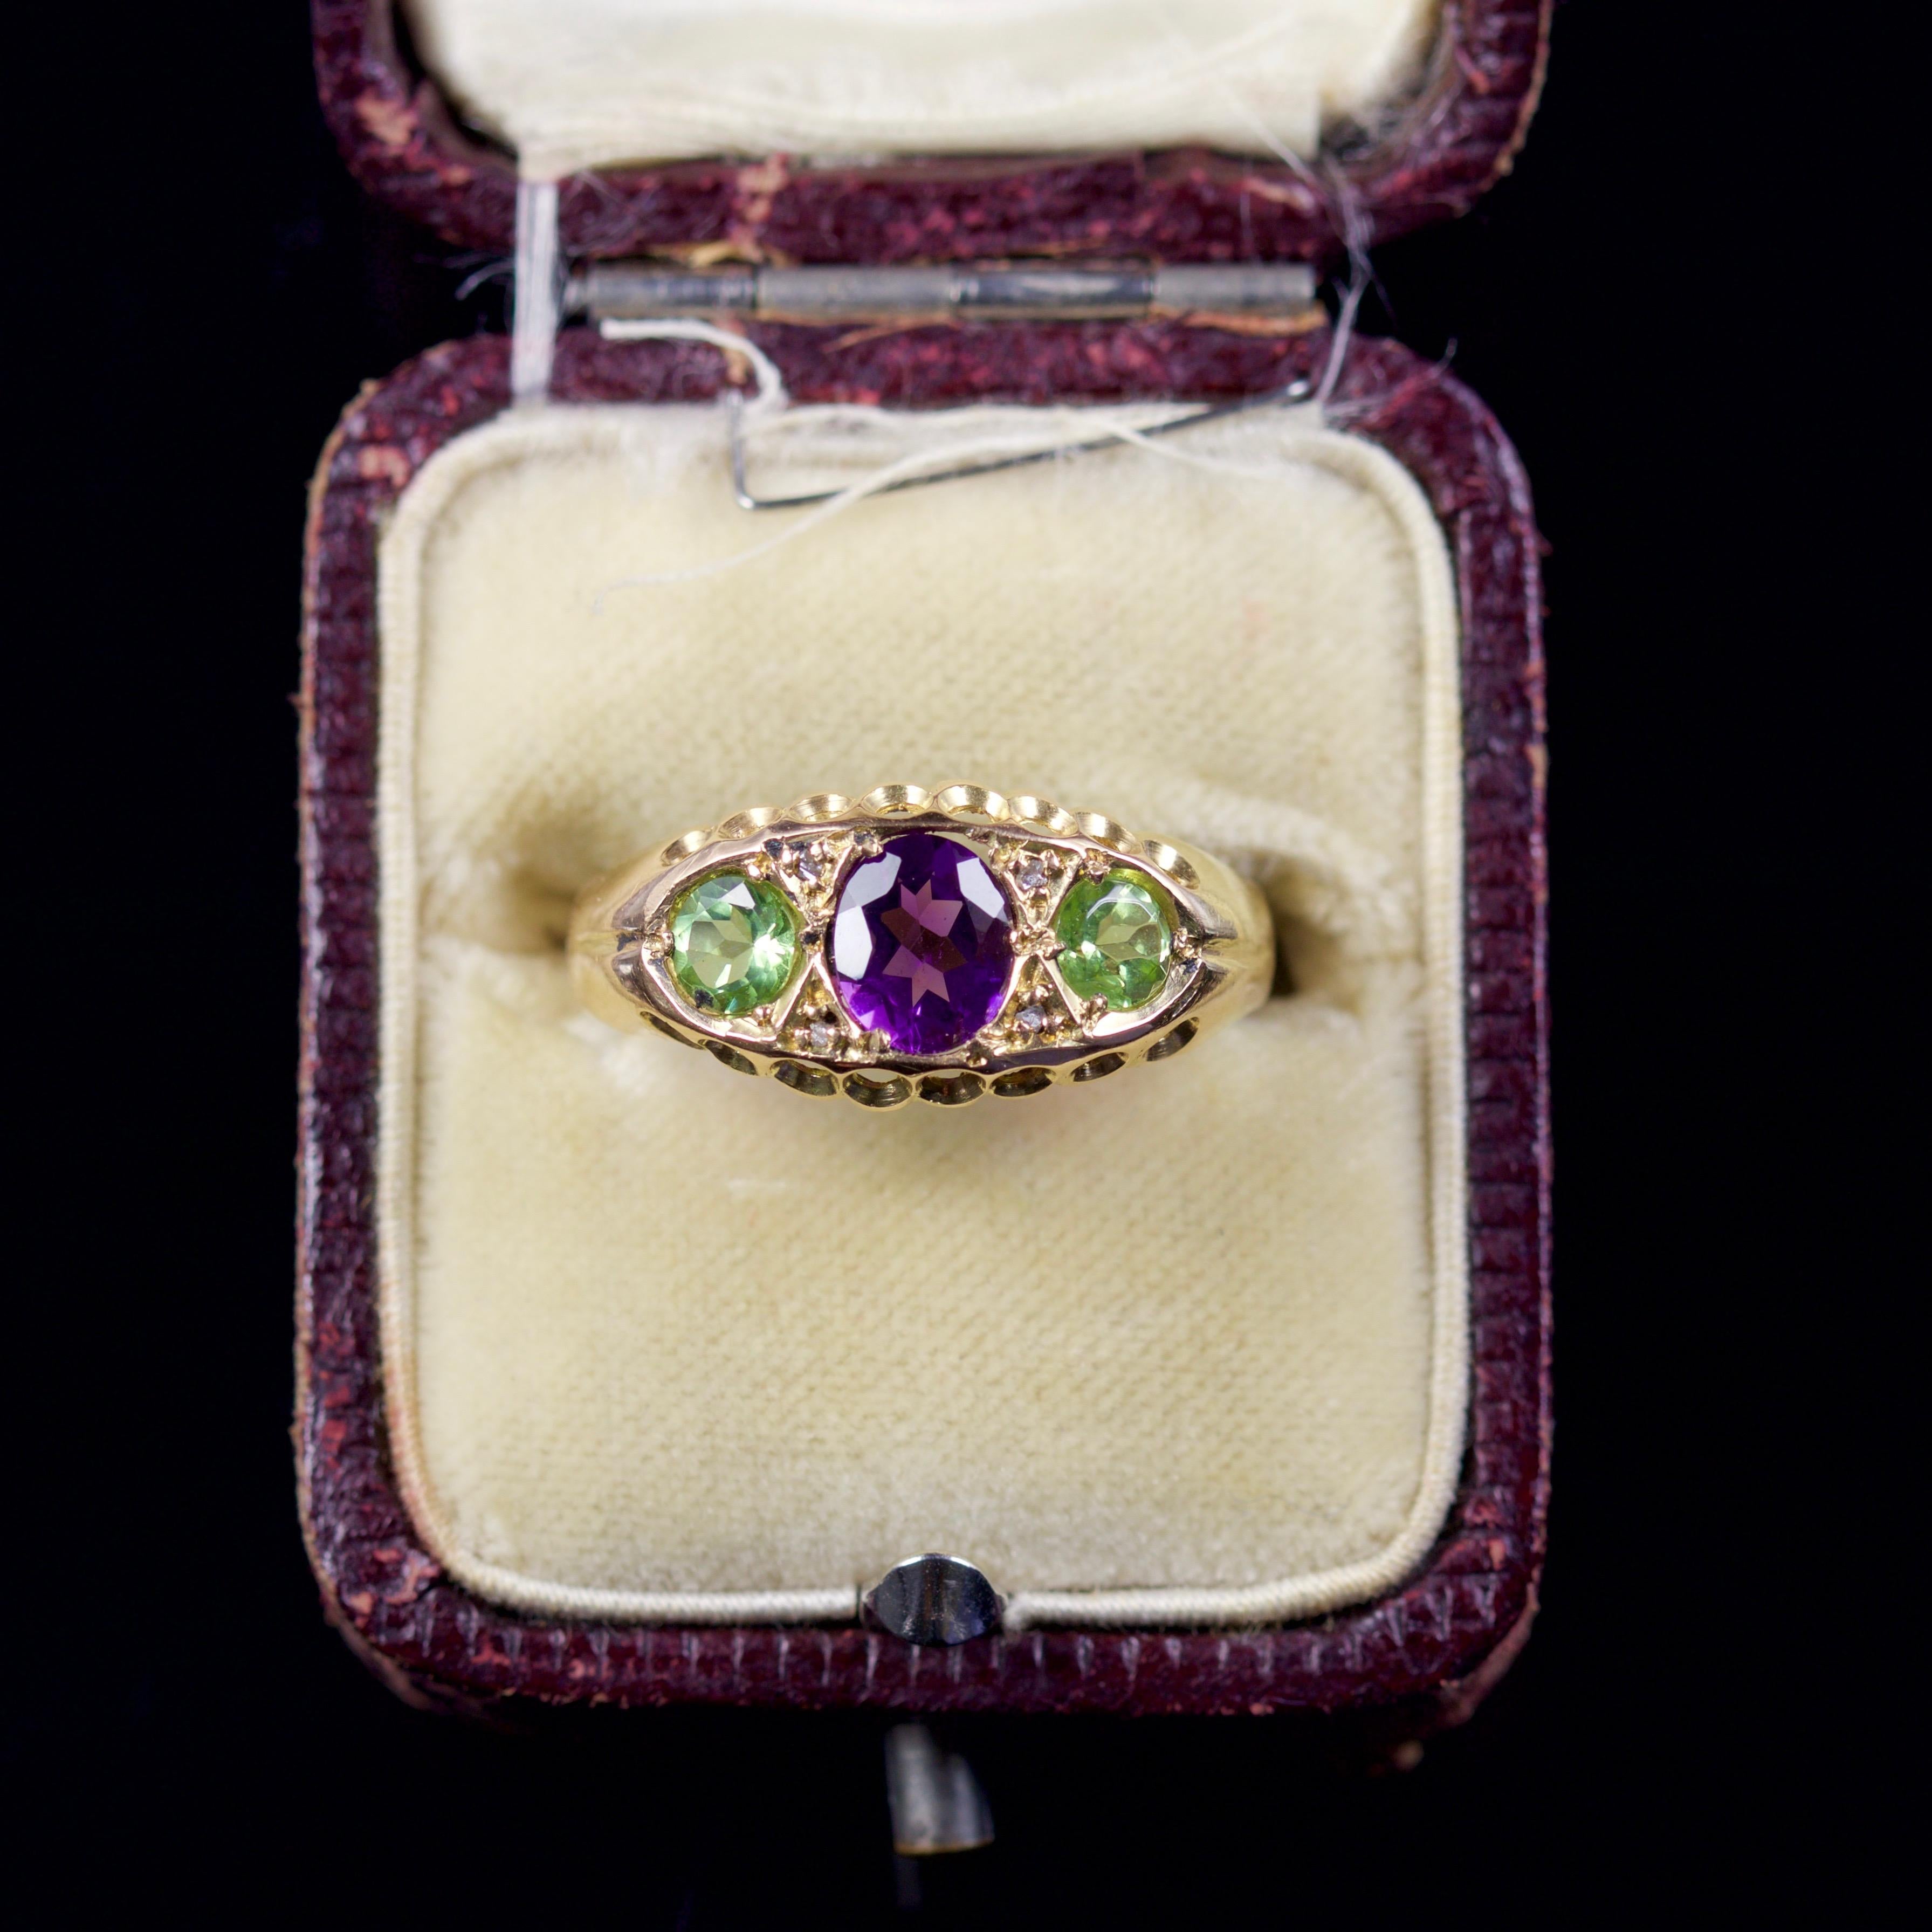 Antique Victorian Ring Suffragette Amethyst Peridot Diamond 18 Carat Dated 1912 2